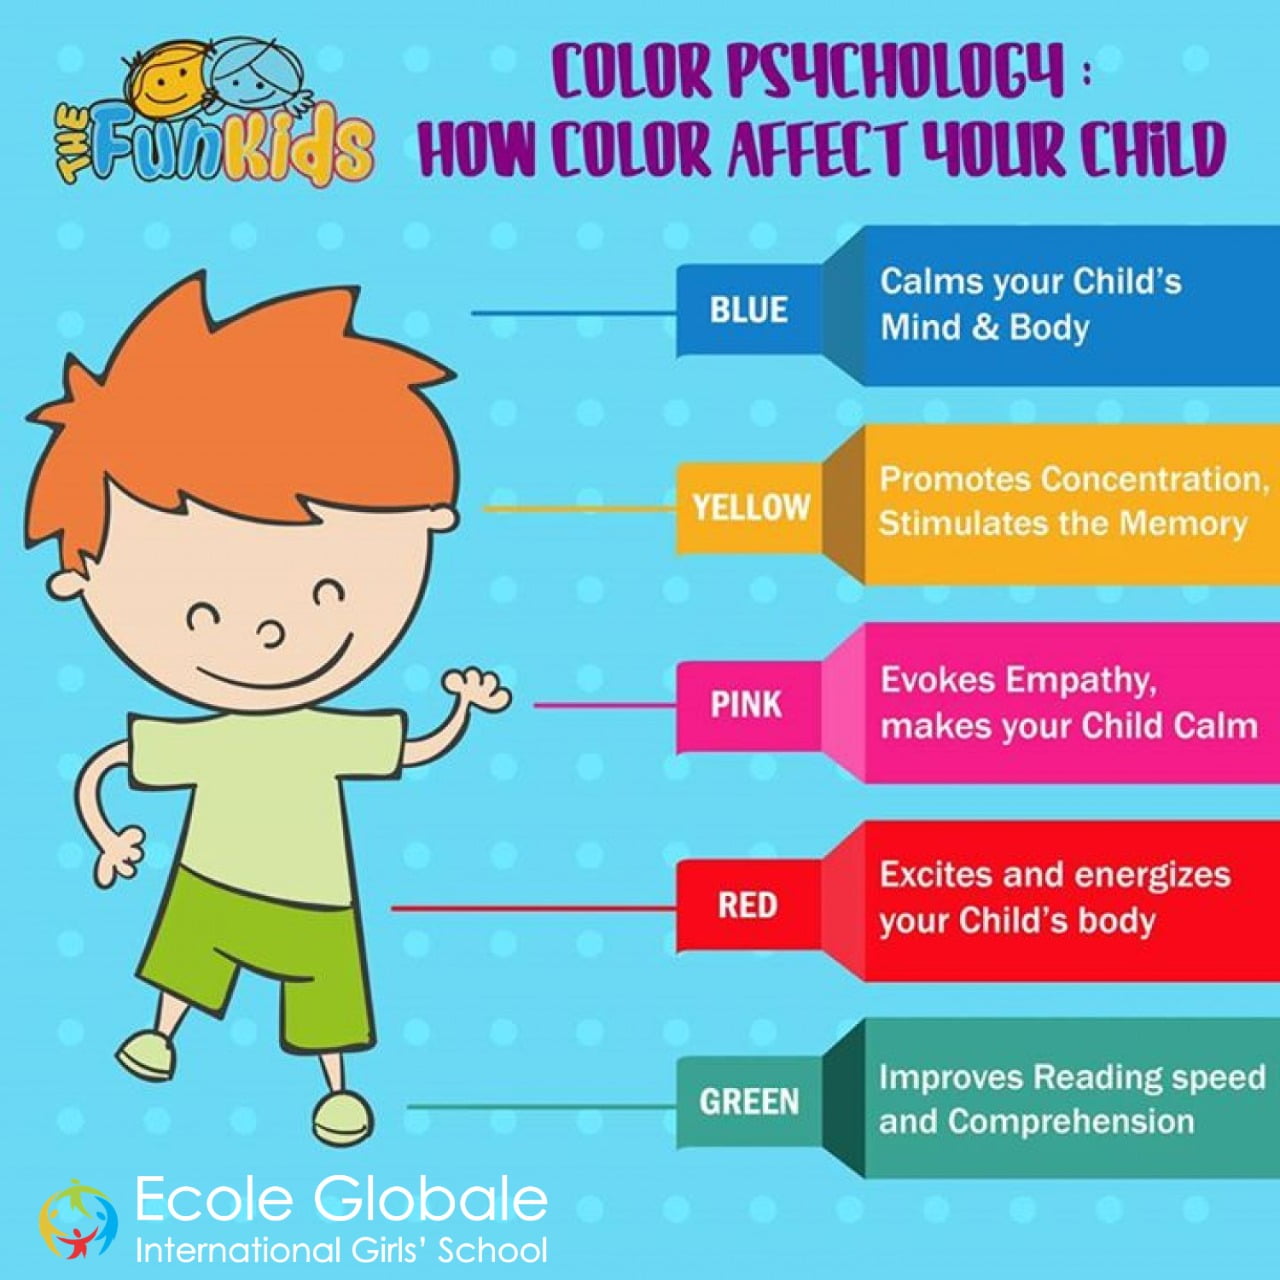 HOW COLOR AFFECTS YOUR CHILD 